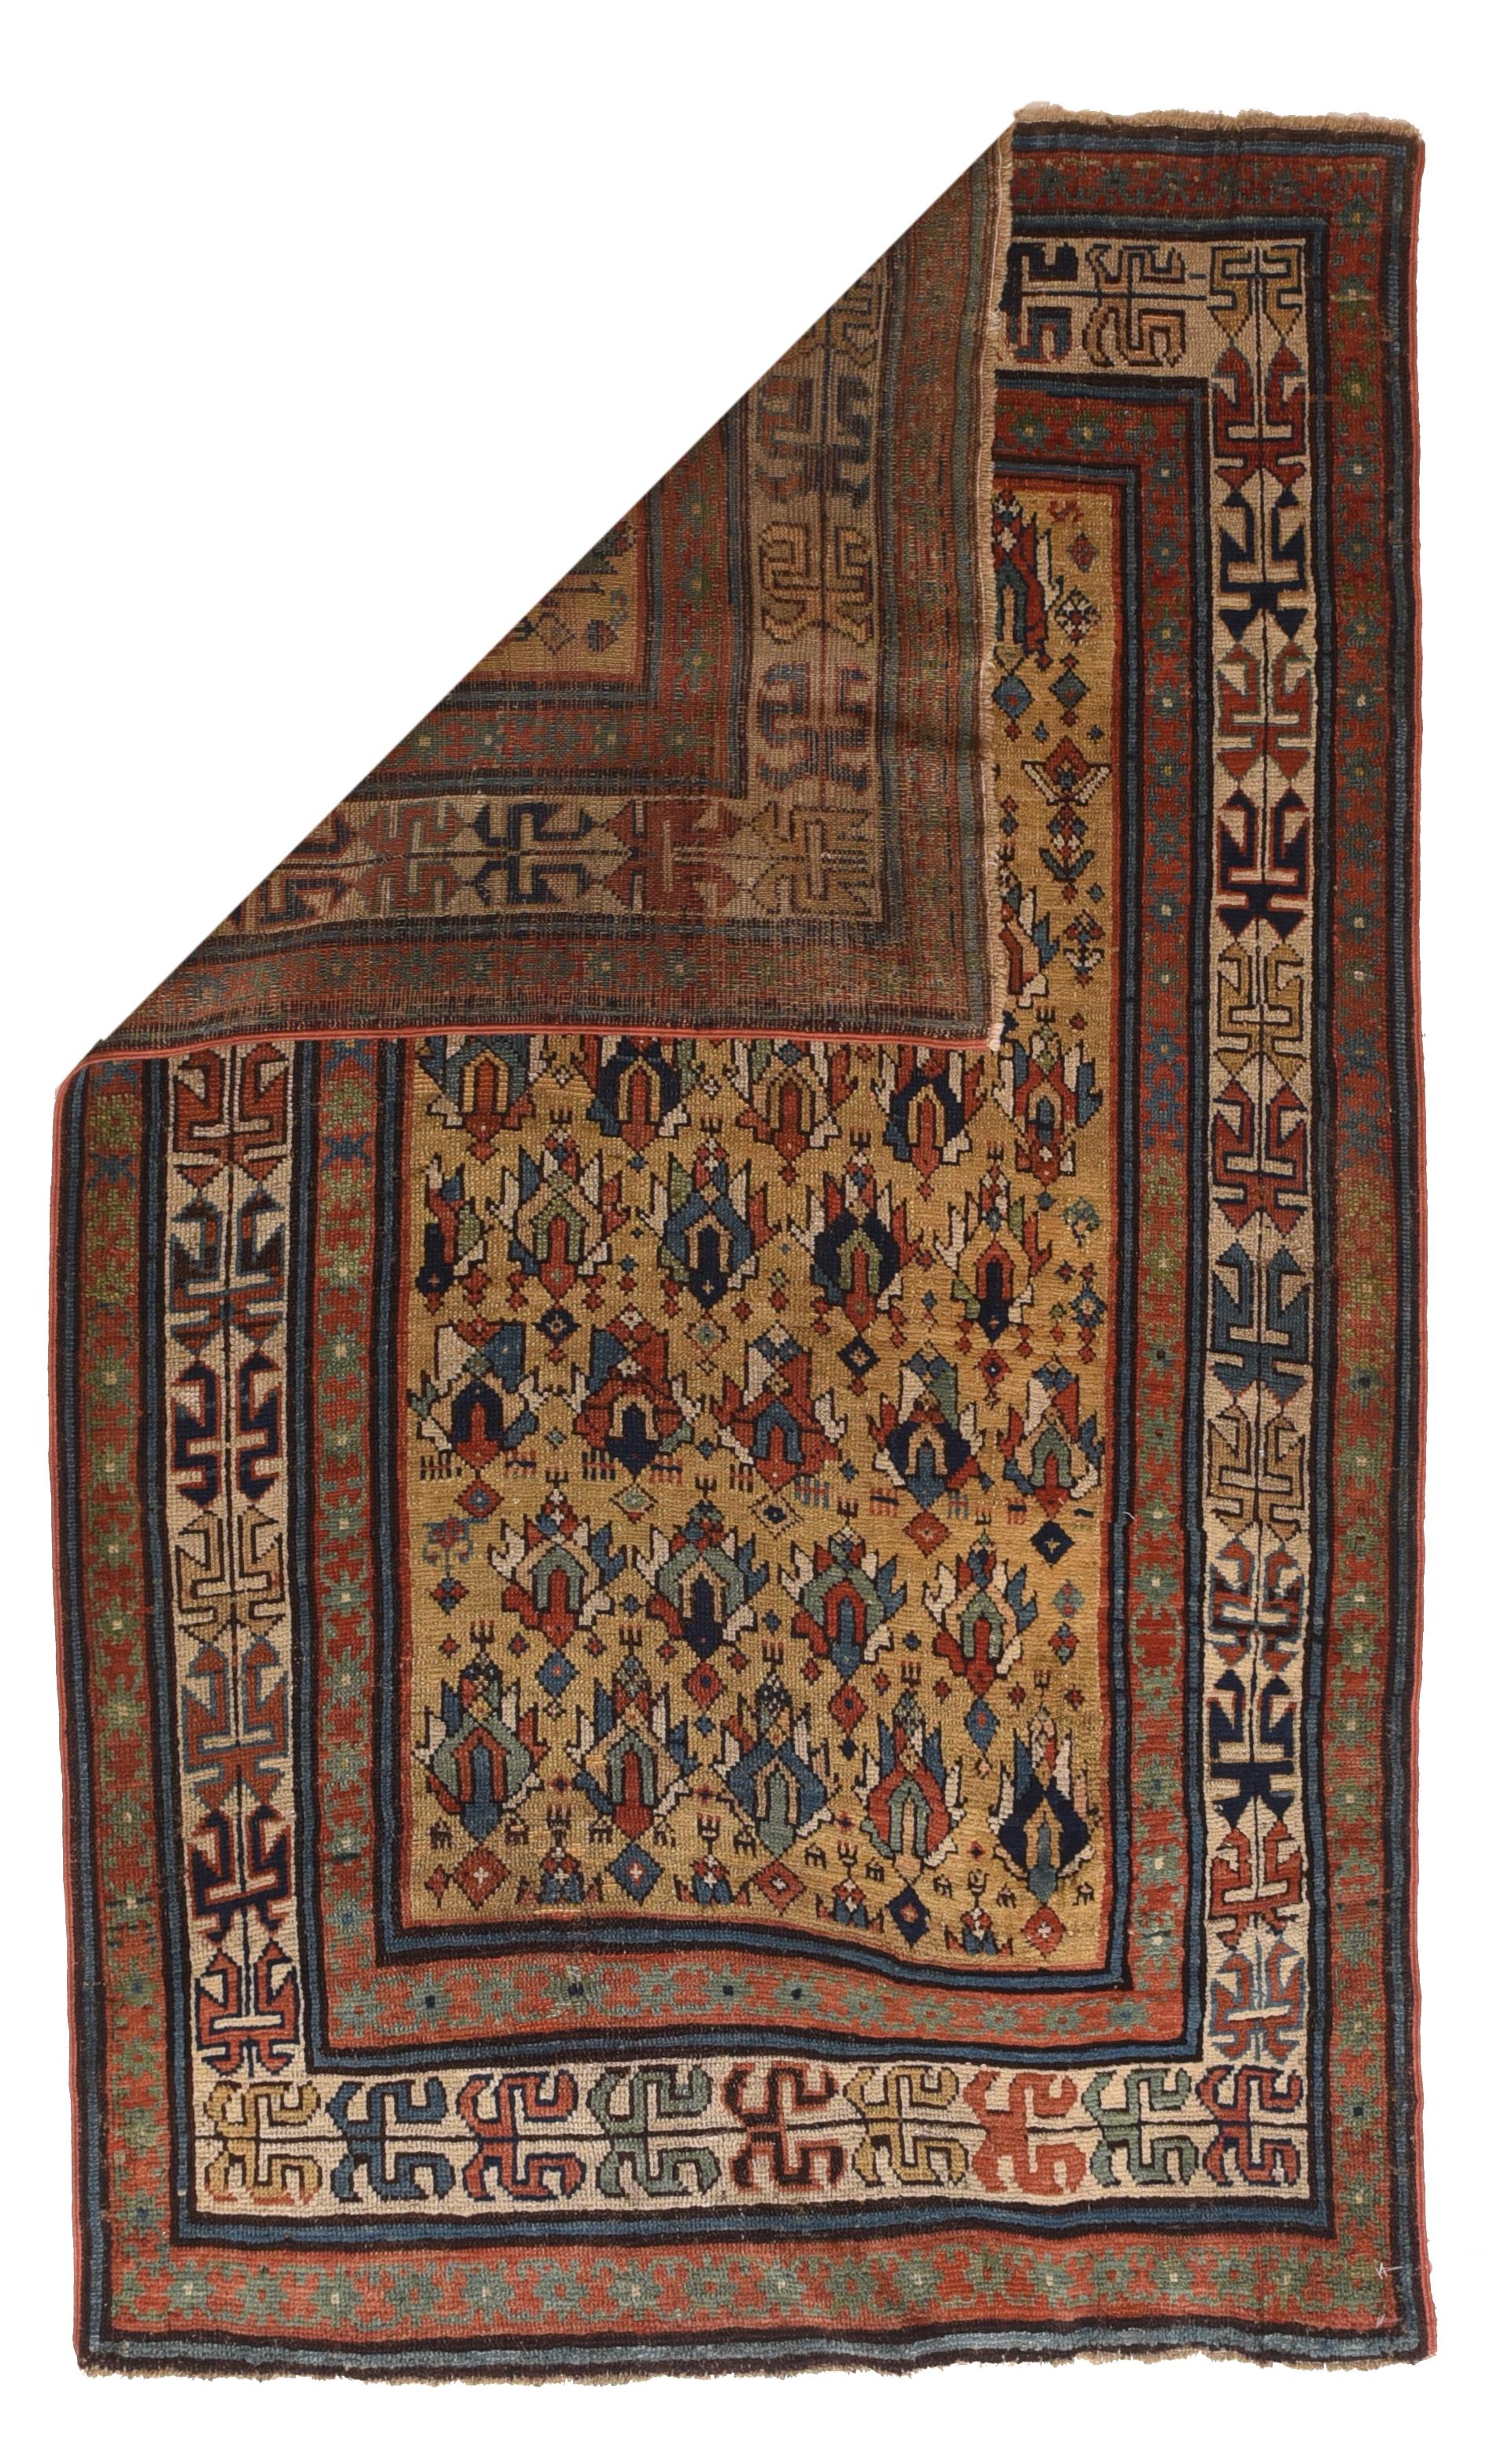 Caucasian rugs are primarily produced as village productions rather than city pieces. Made from materials particular to individual tribal provinces, the rugs of the Caucasus normally display bold geometric designs in primary colors. Styles typical